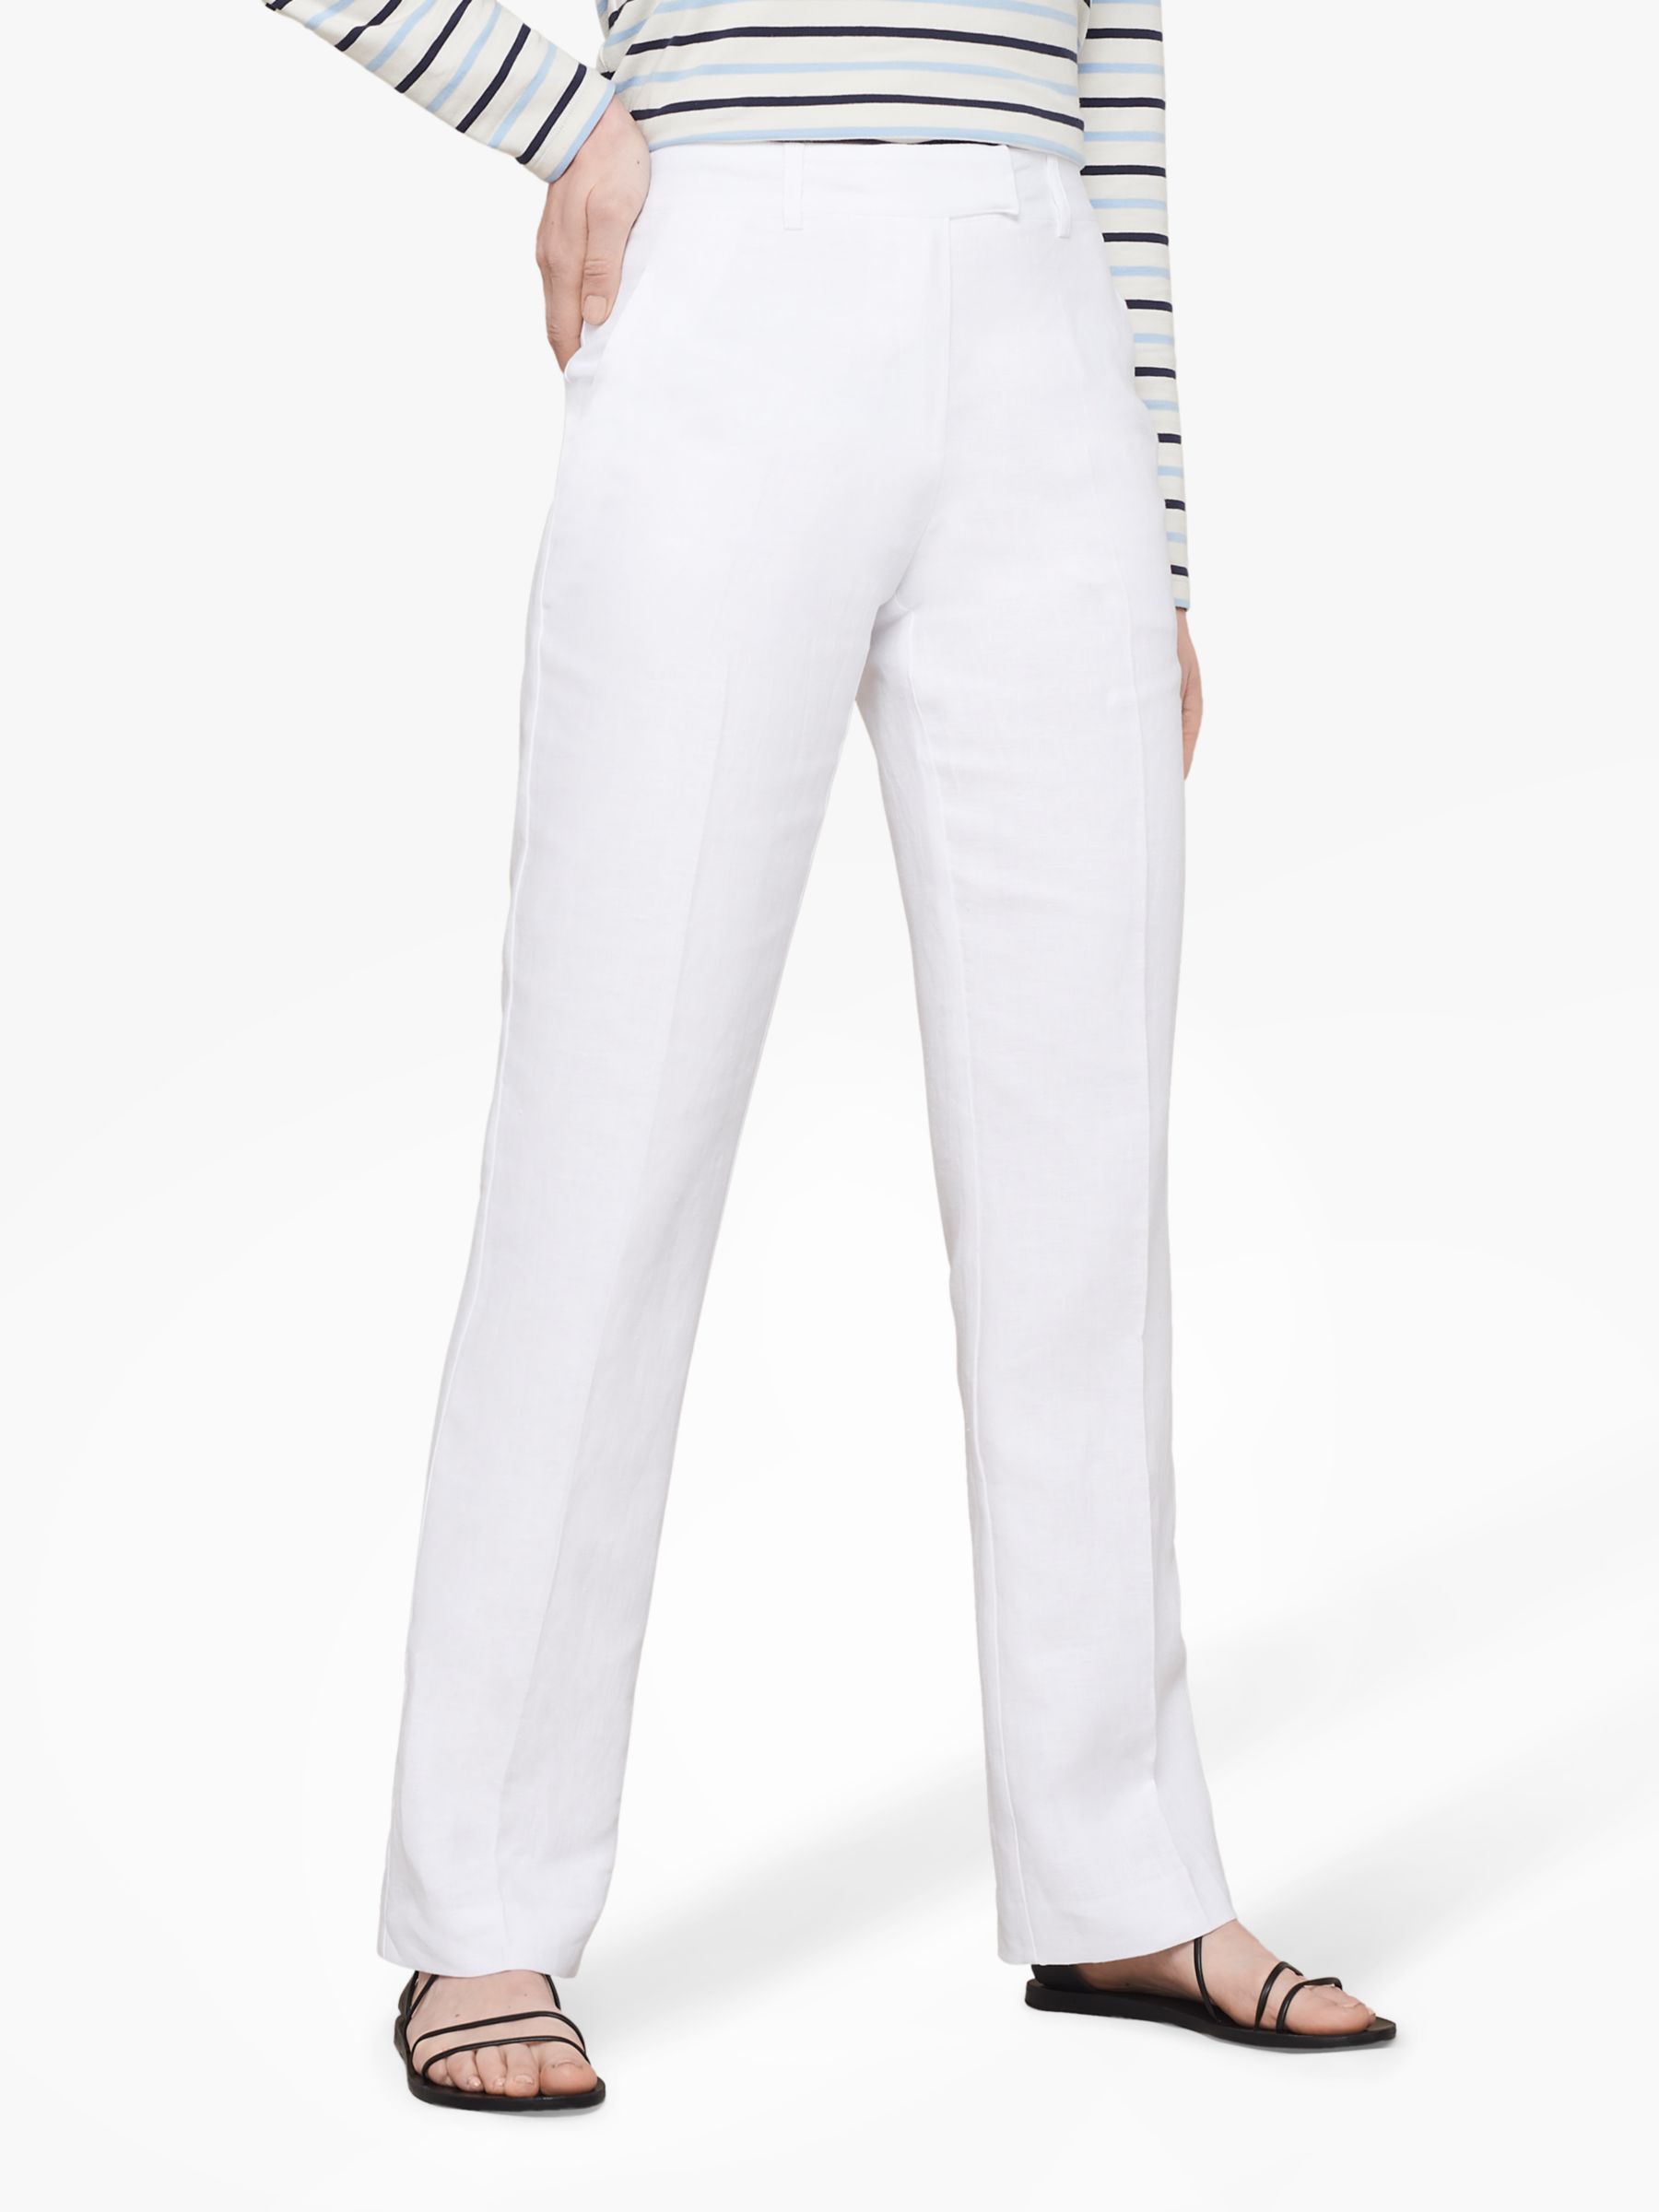 womens white tailored trousers